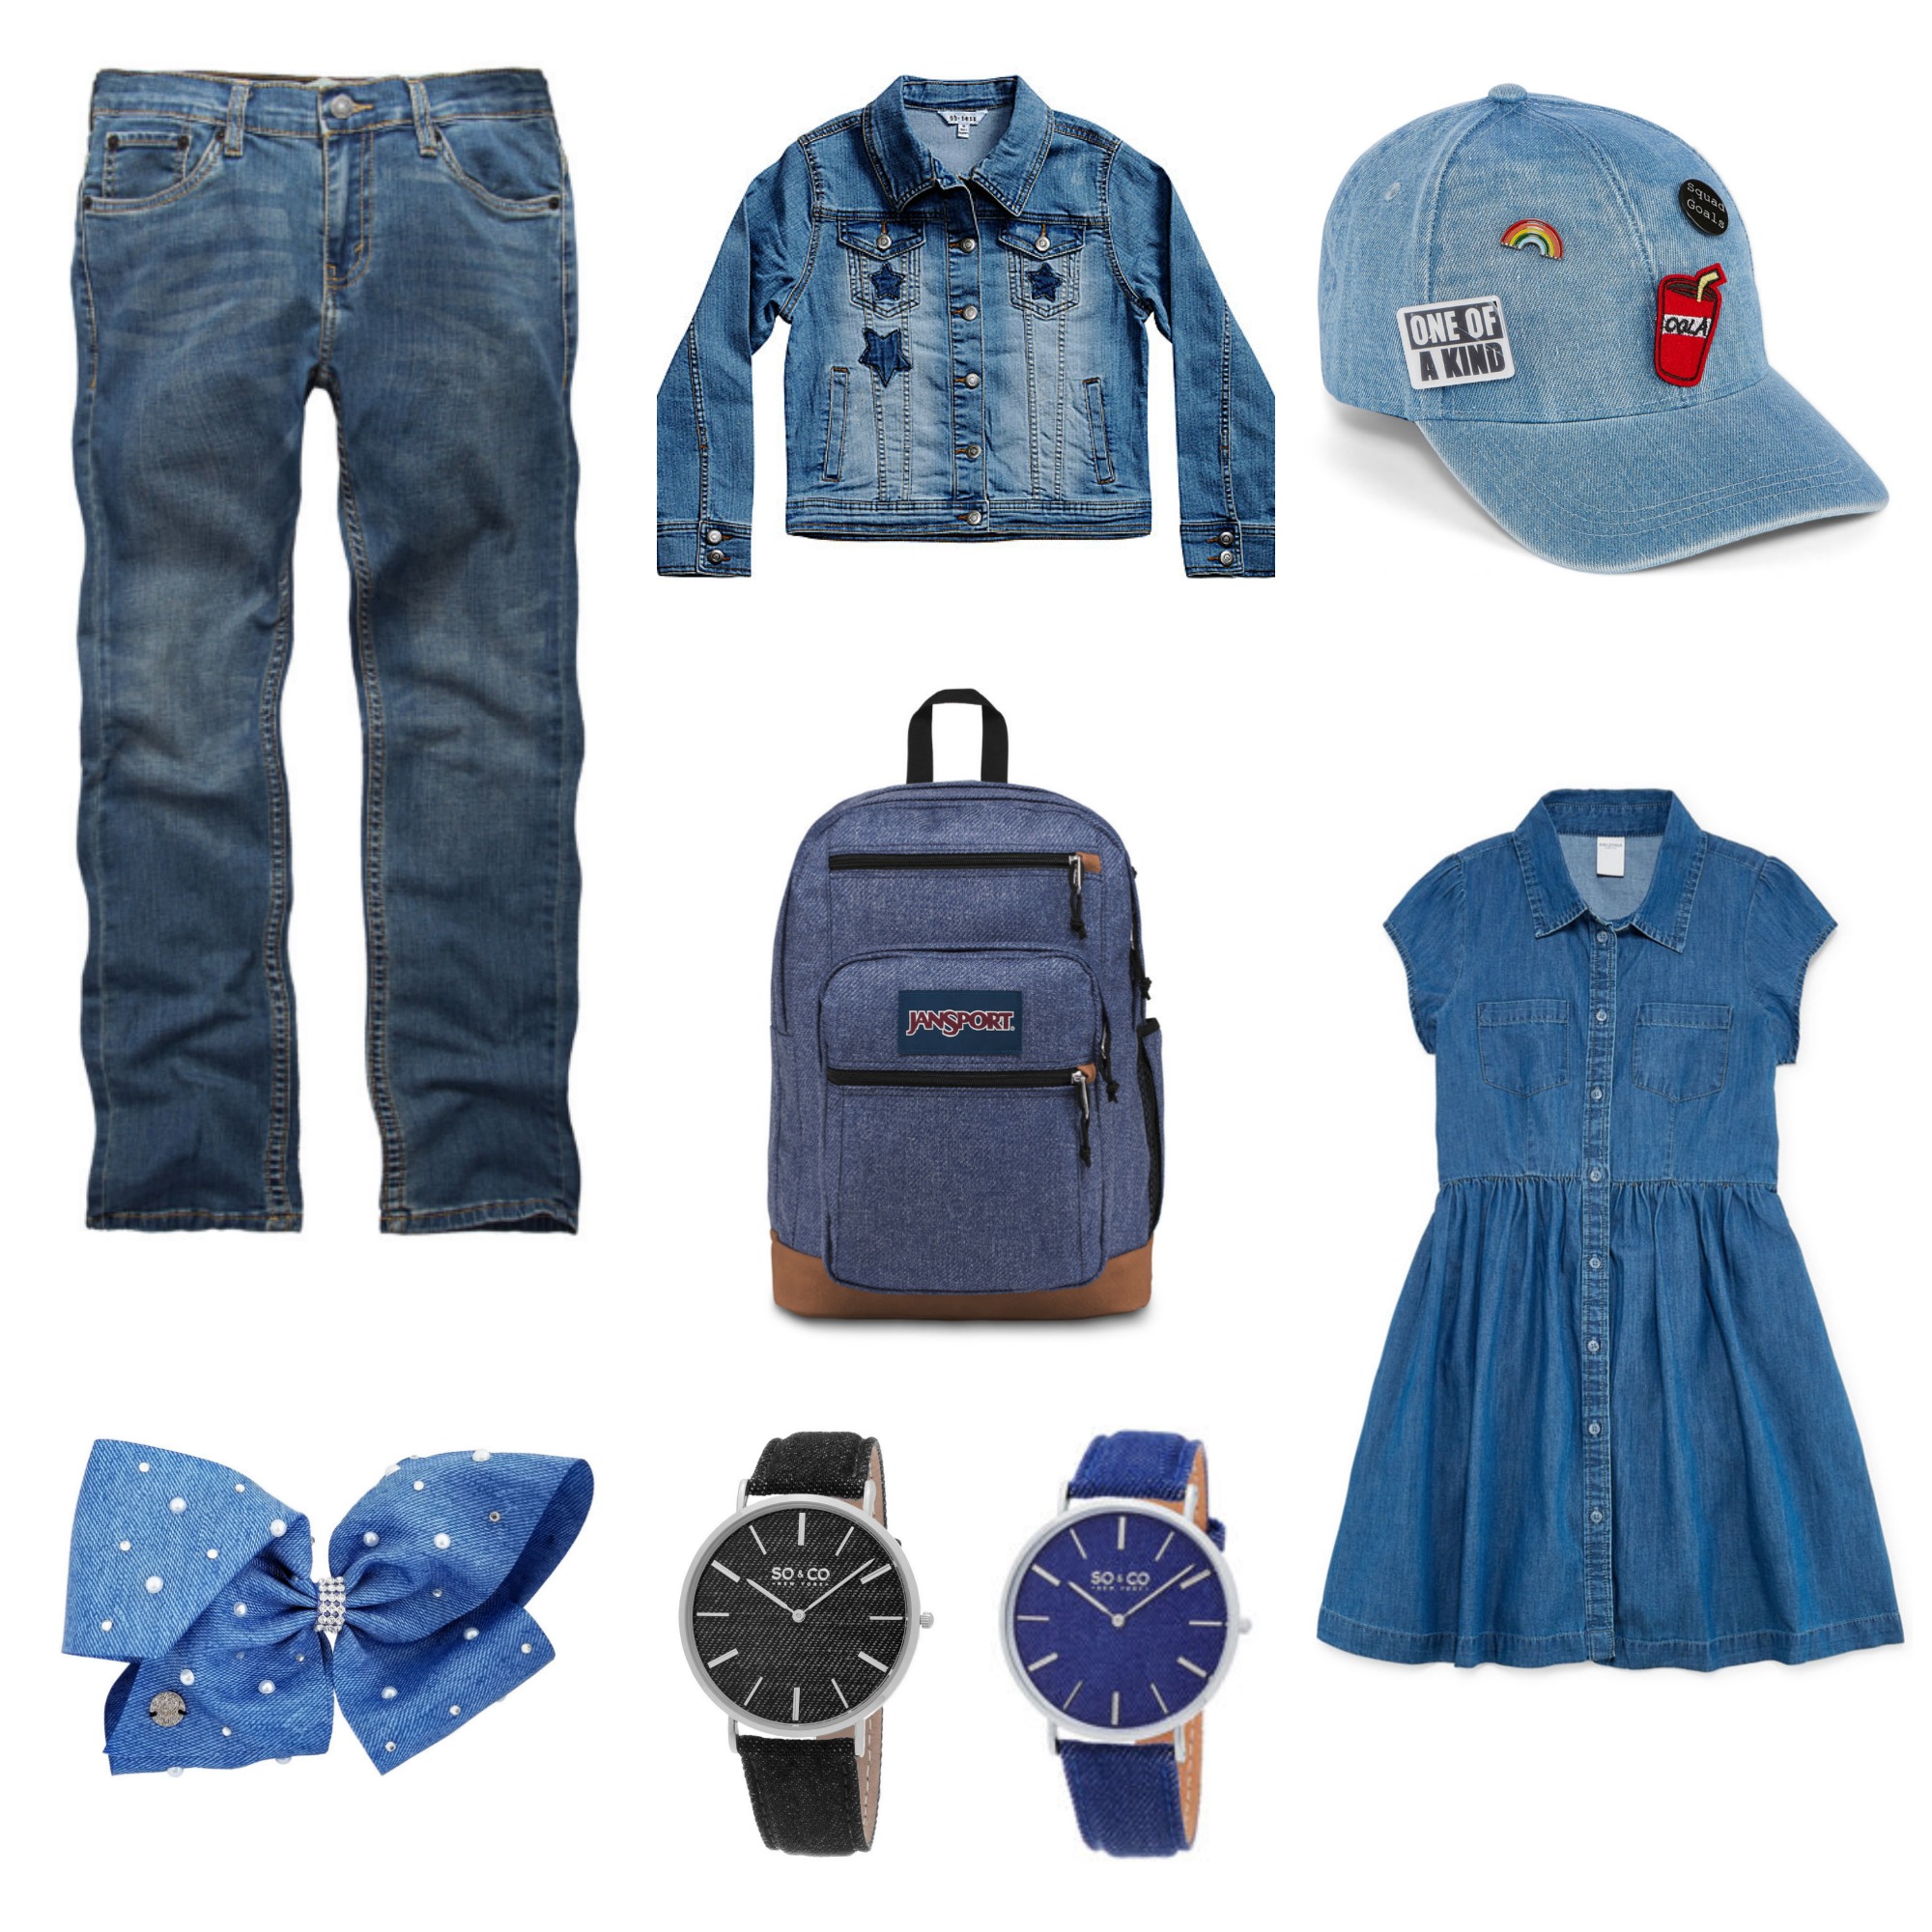 5 of the top backtoschool fashion trends, and where to find them for